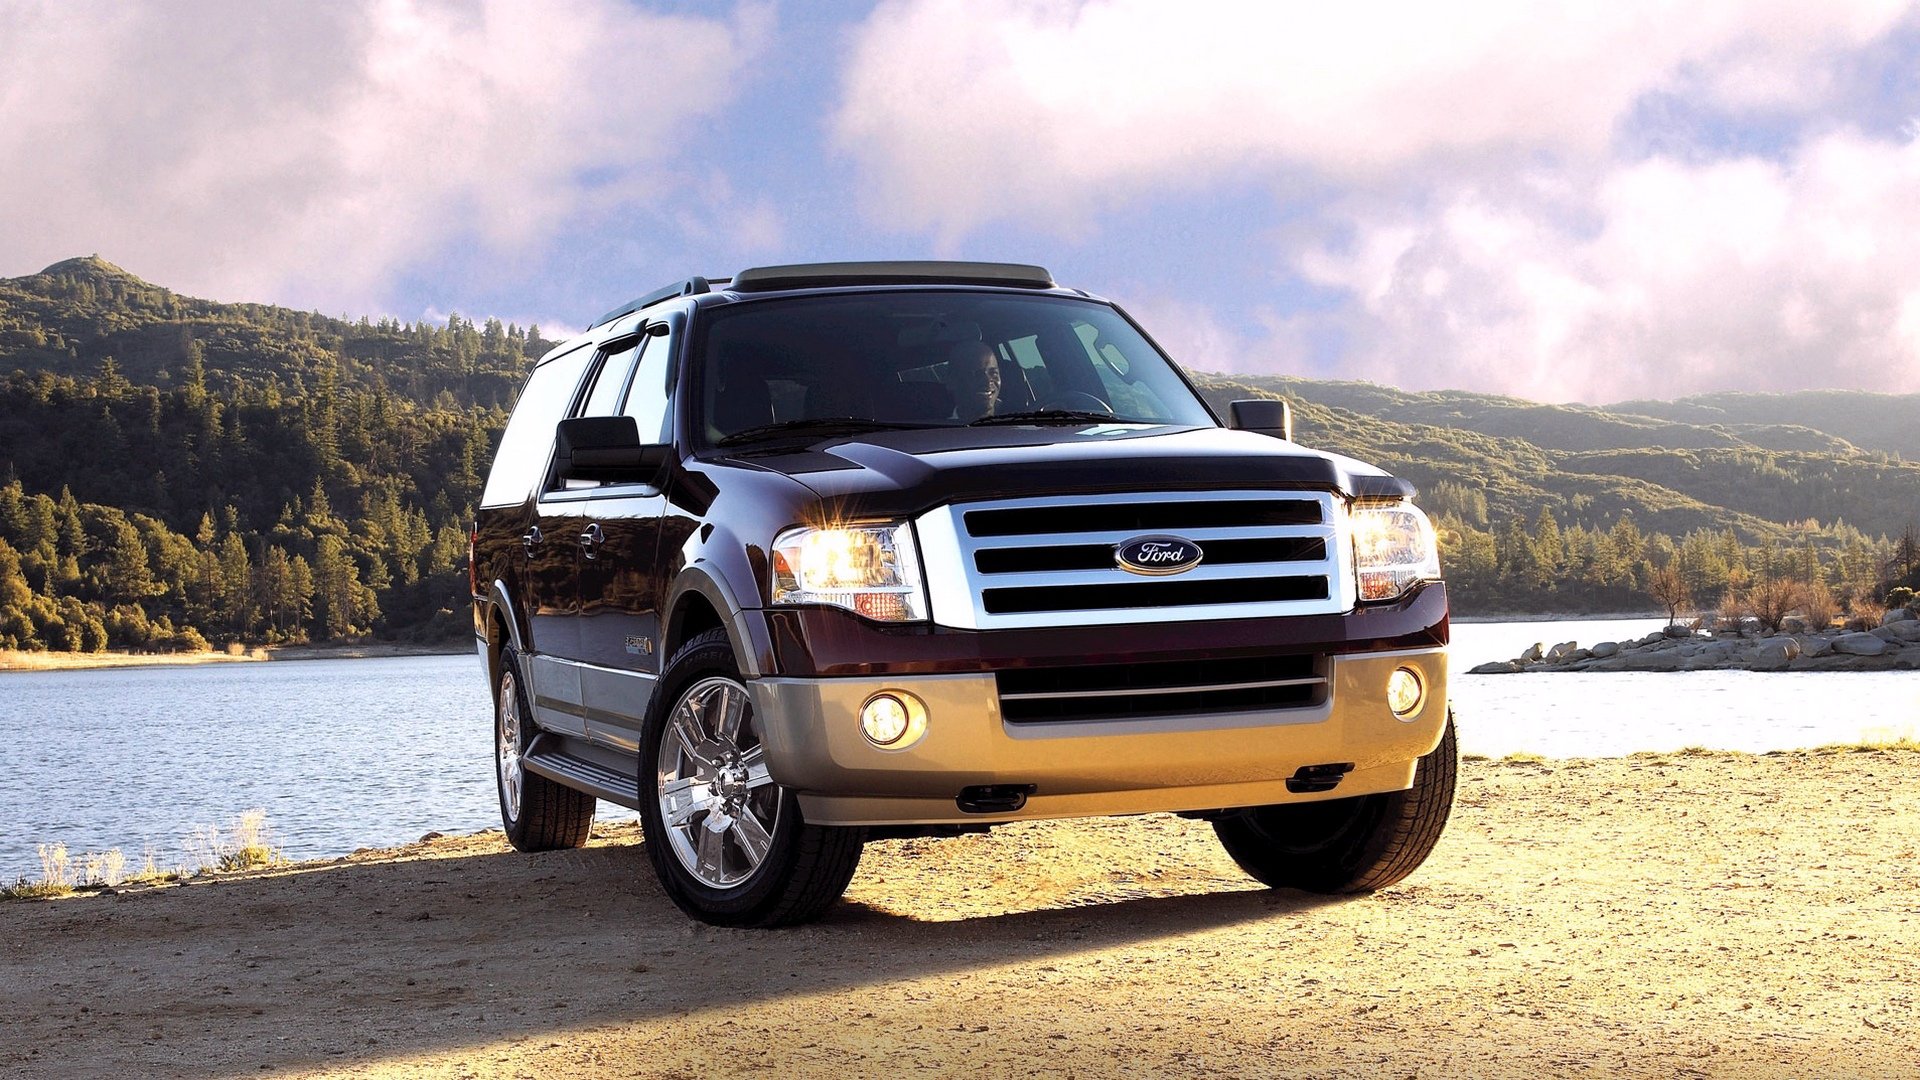 2008, Ford, Expedition Wallpaper